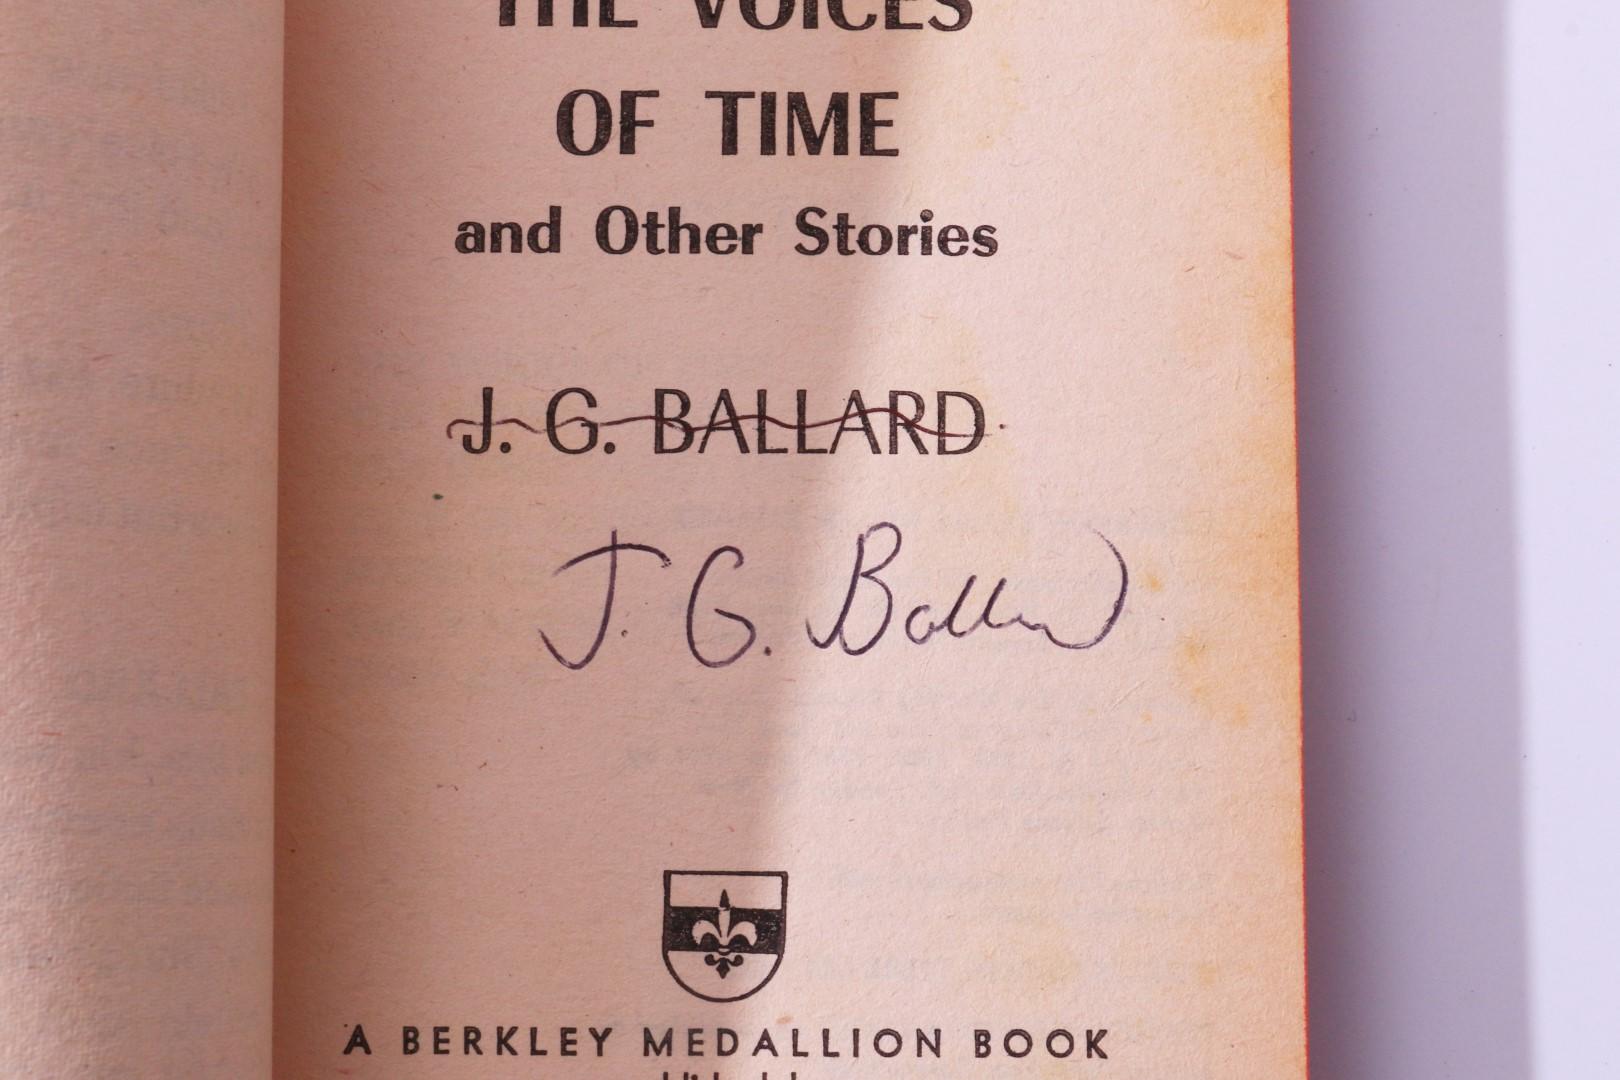 J.G. Ballard - The Voices of Time and Other Stories - Berkley, 1962, Signed First Edition.